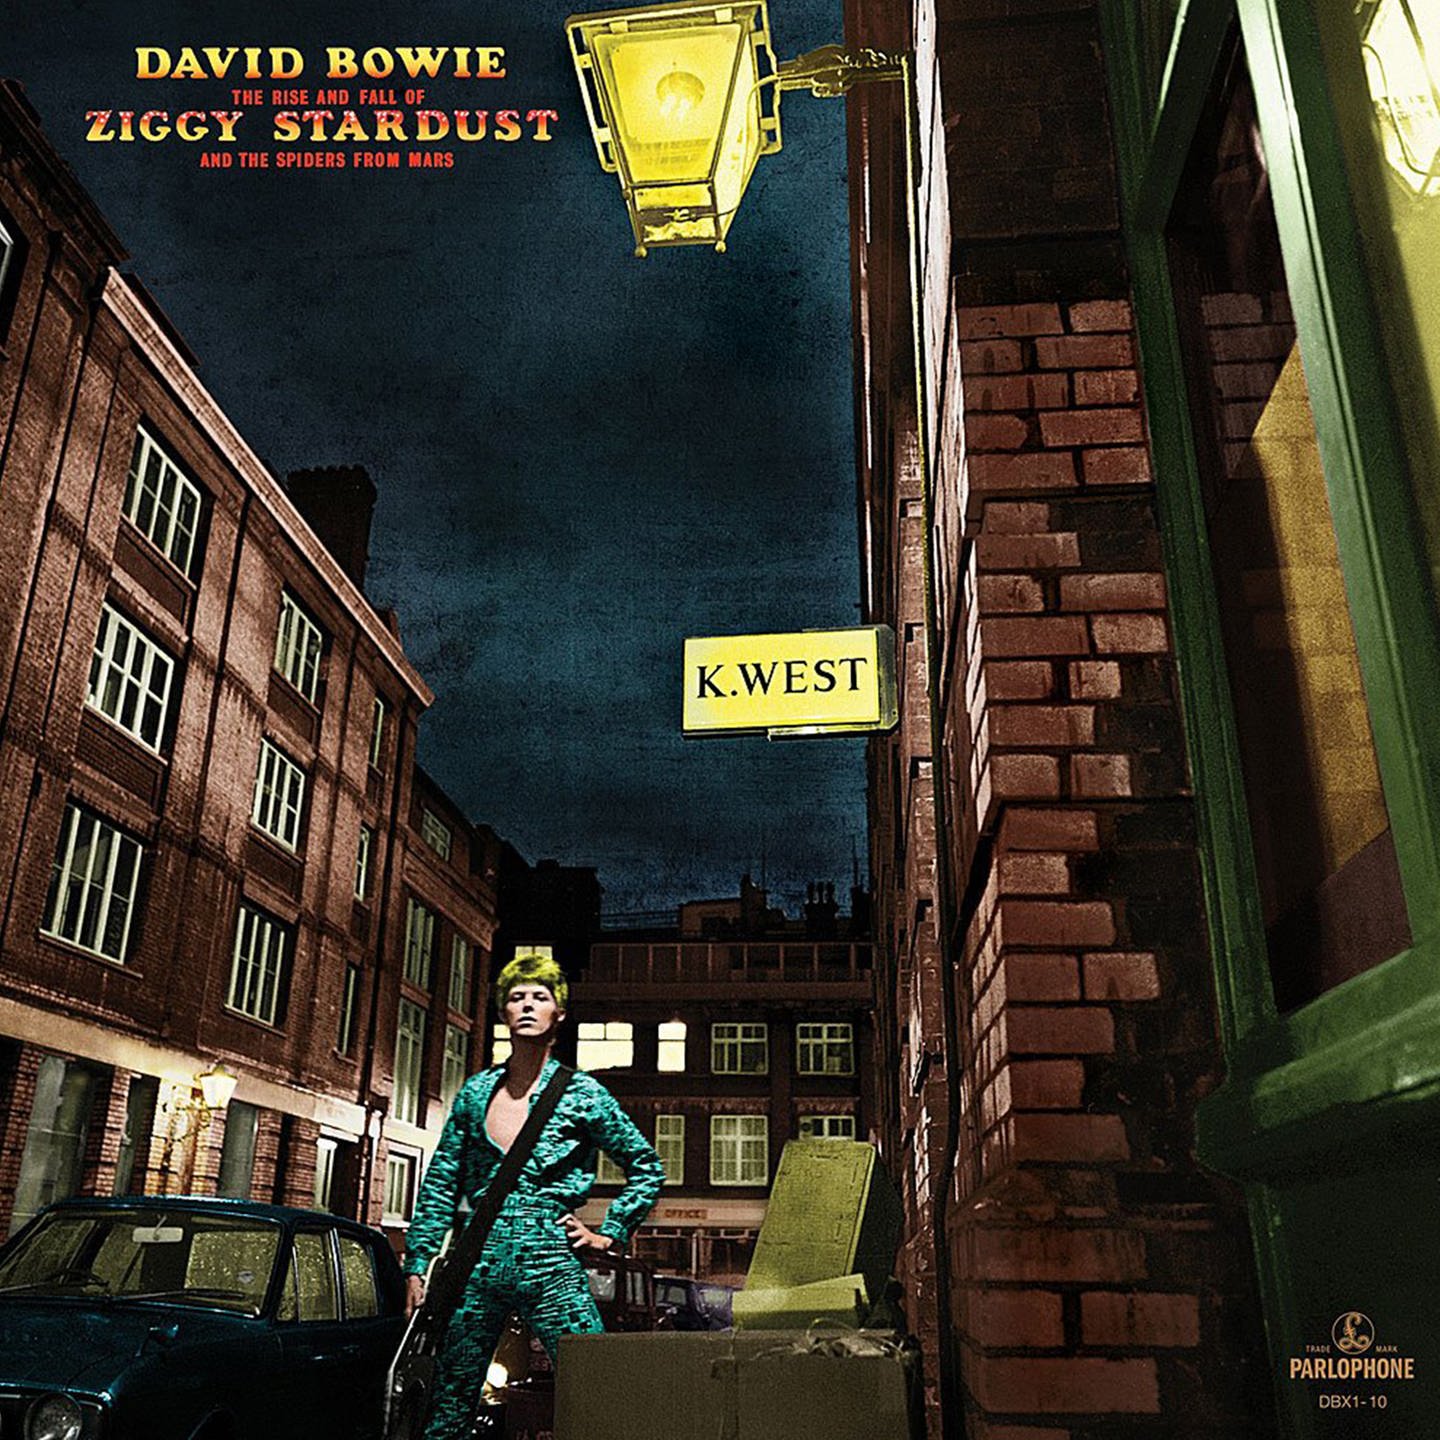 Download David Bowie The Rise And Fall Of Ziggy Stardust And The Spiders From Mars 1972 Gnodde 8275